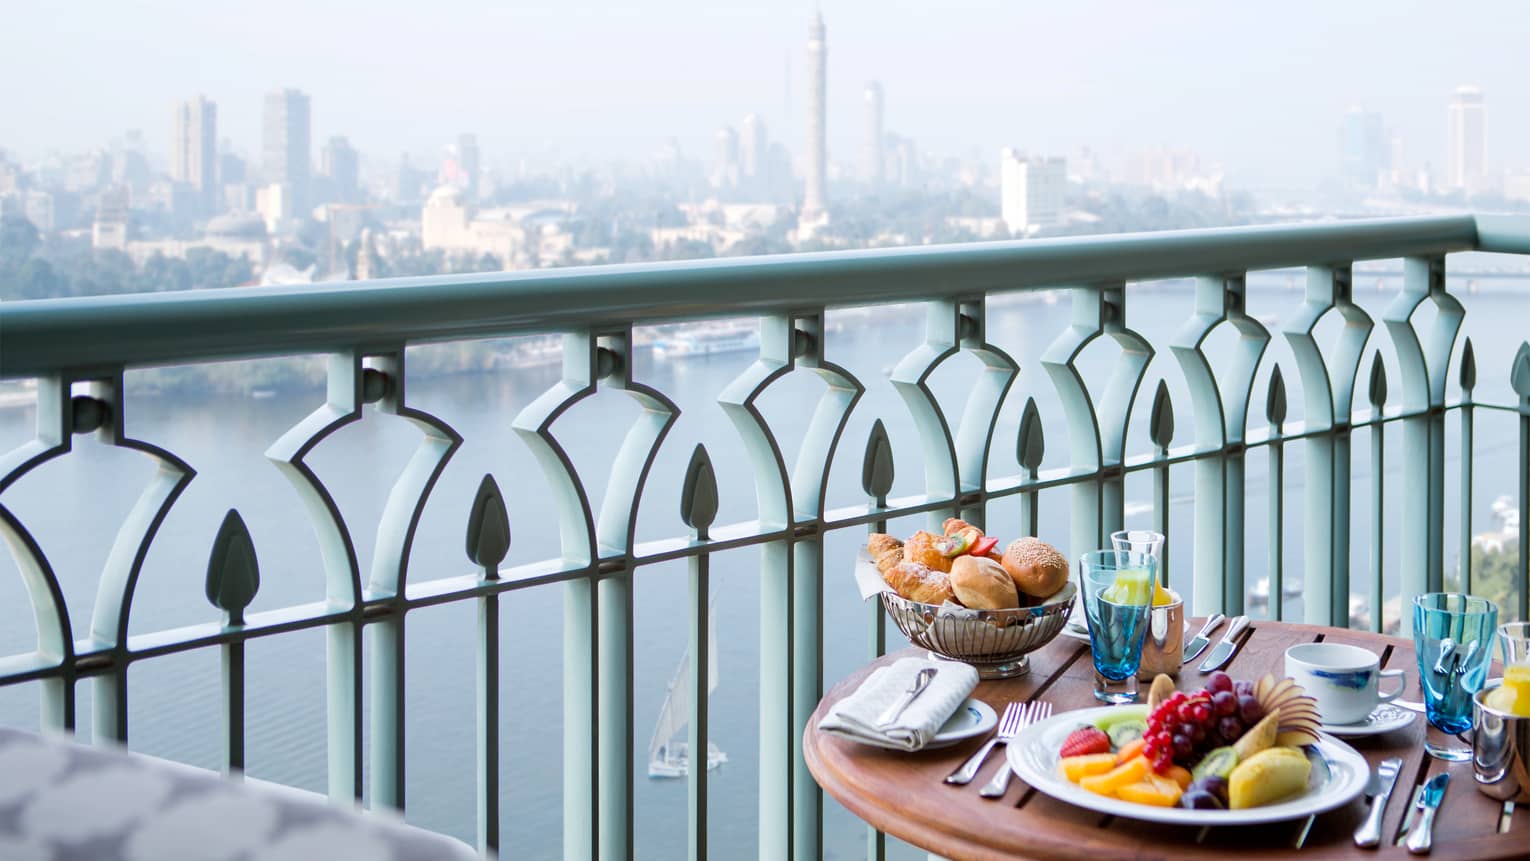 Close-up of balcony table with plate of fresh fruit, bread and orange juice, river and city view below